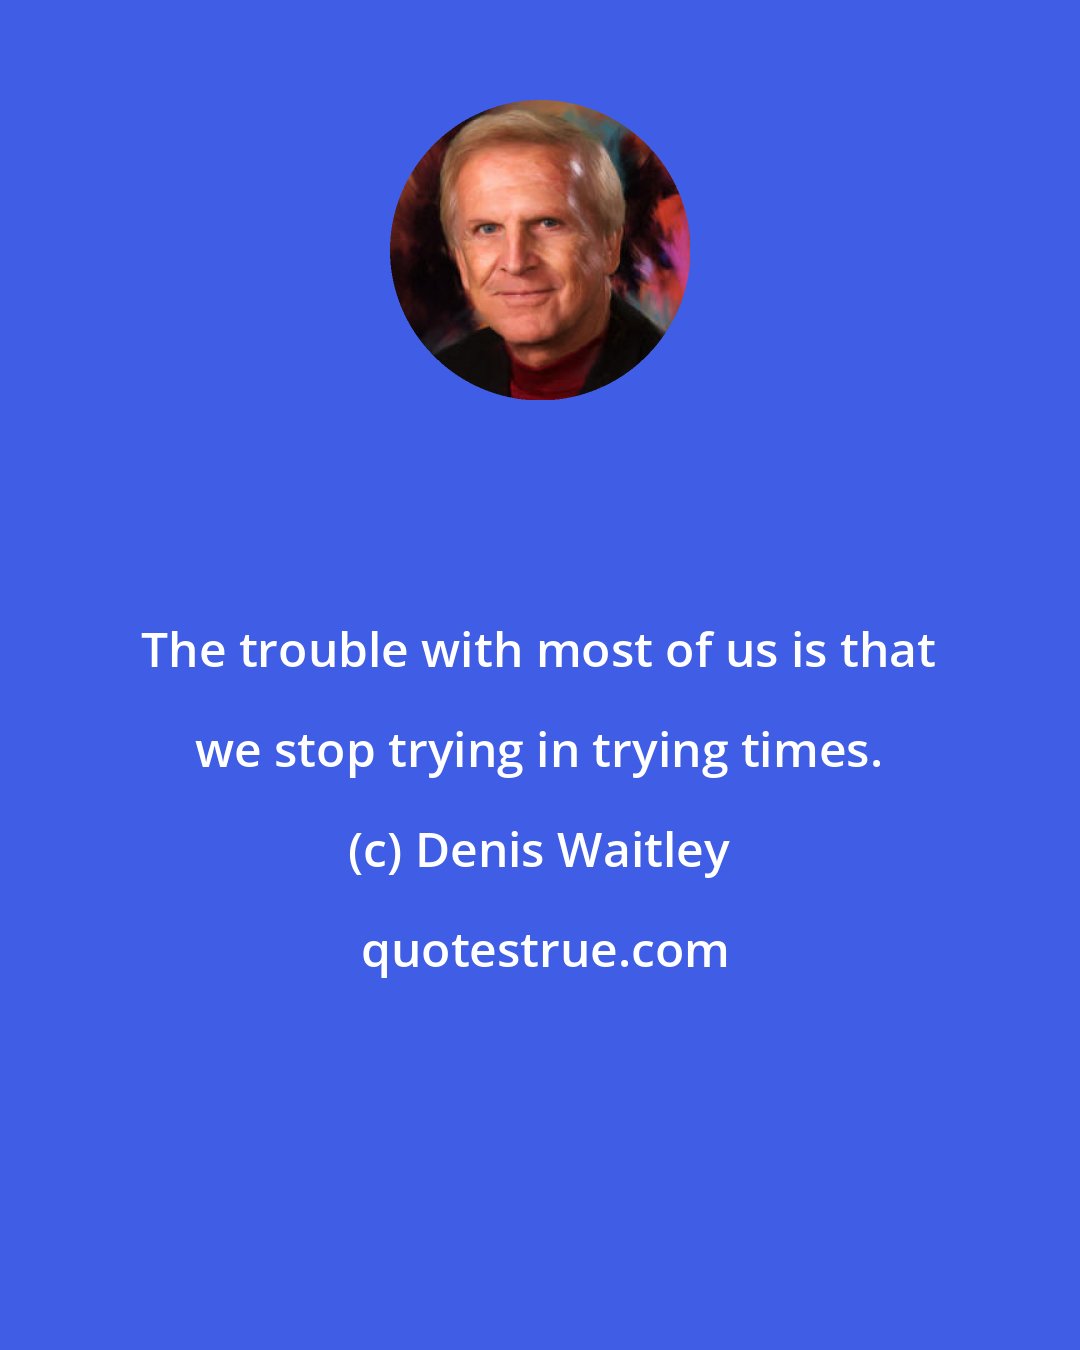 Denis Waitley: The trouble with most of us is that we stop trying in trying times.